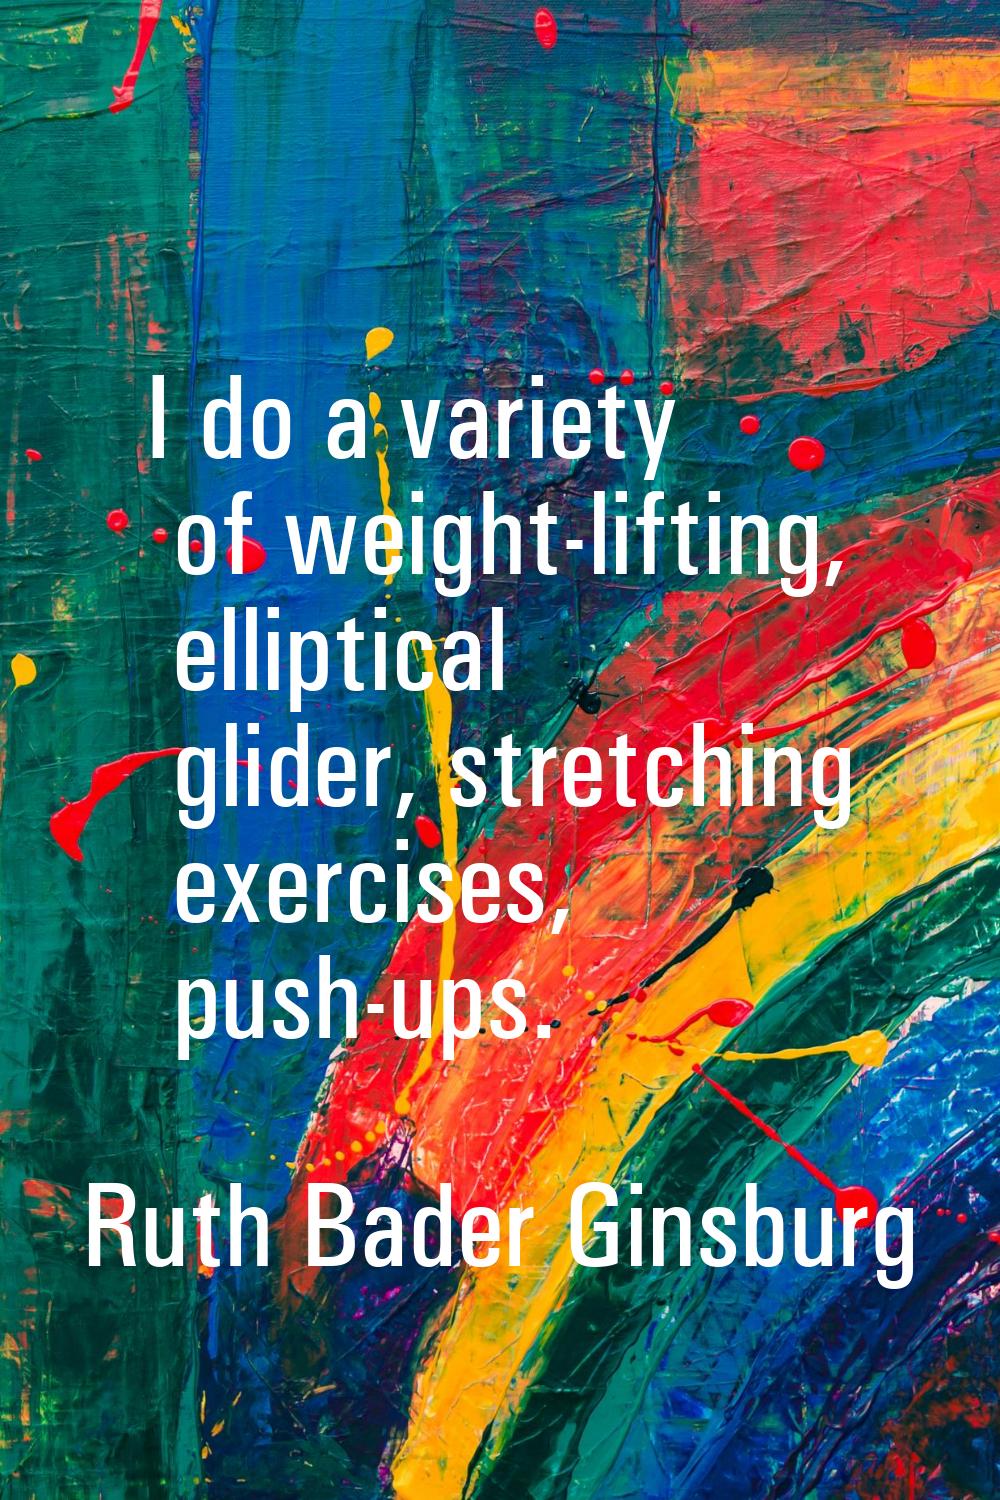 I do a variety of weight-lifting, elliptical glider, stretching exercises, push-ups.